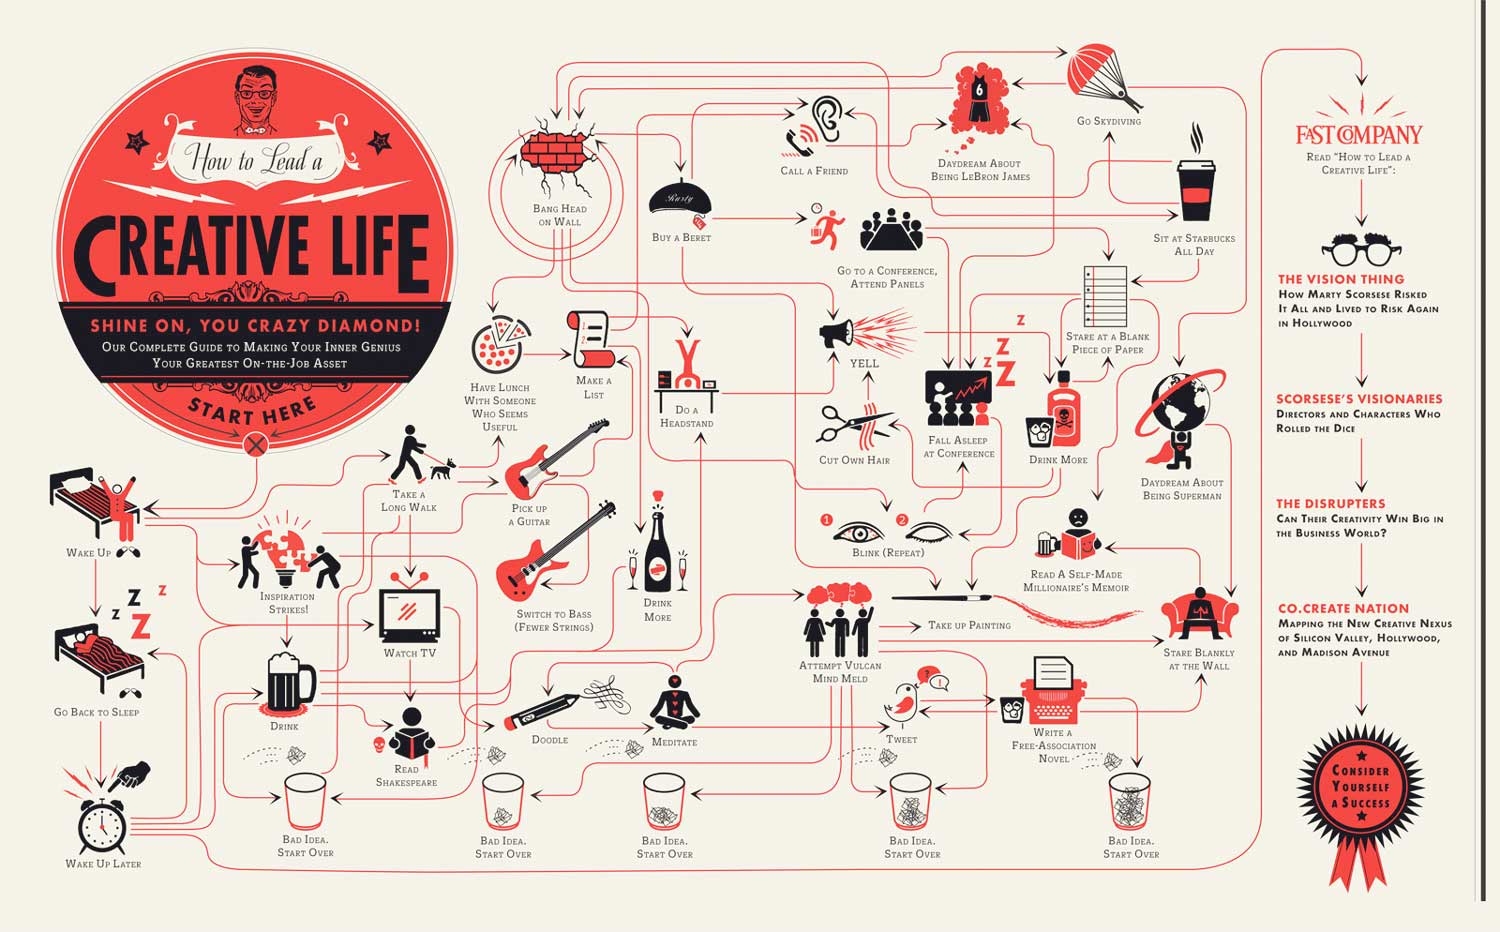 How to Lead A Creative Life